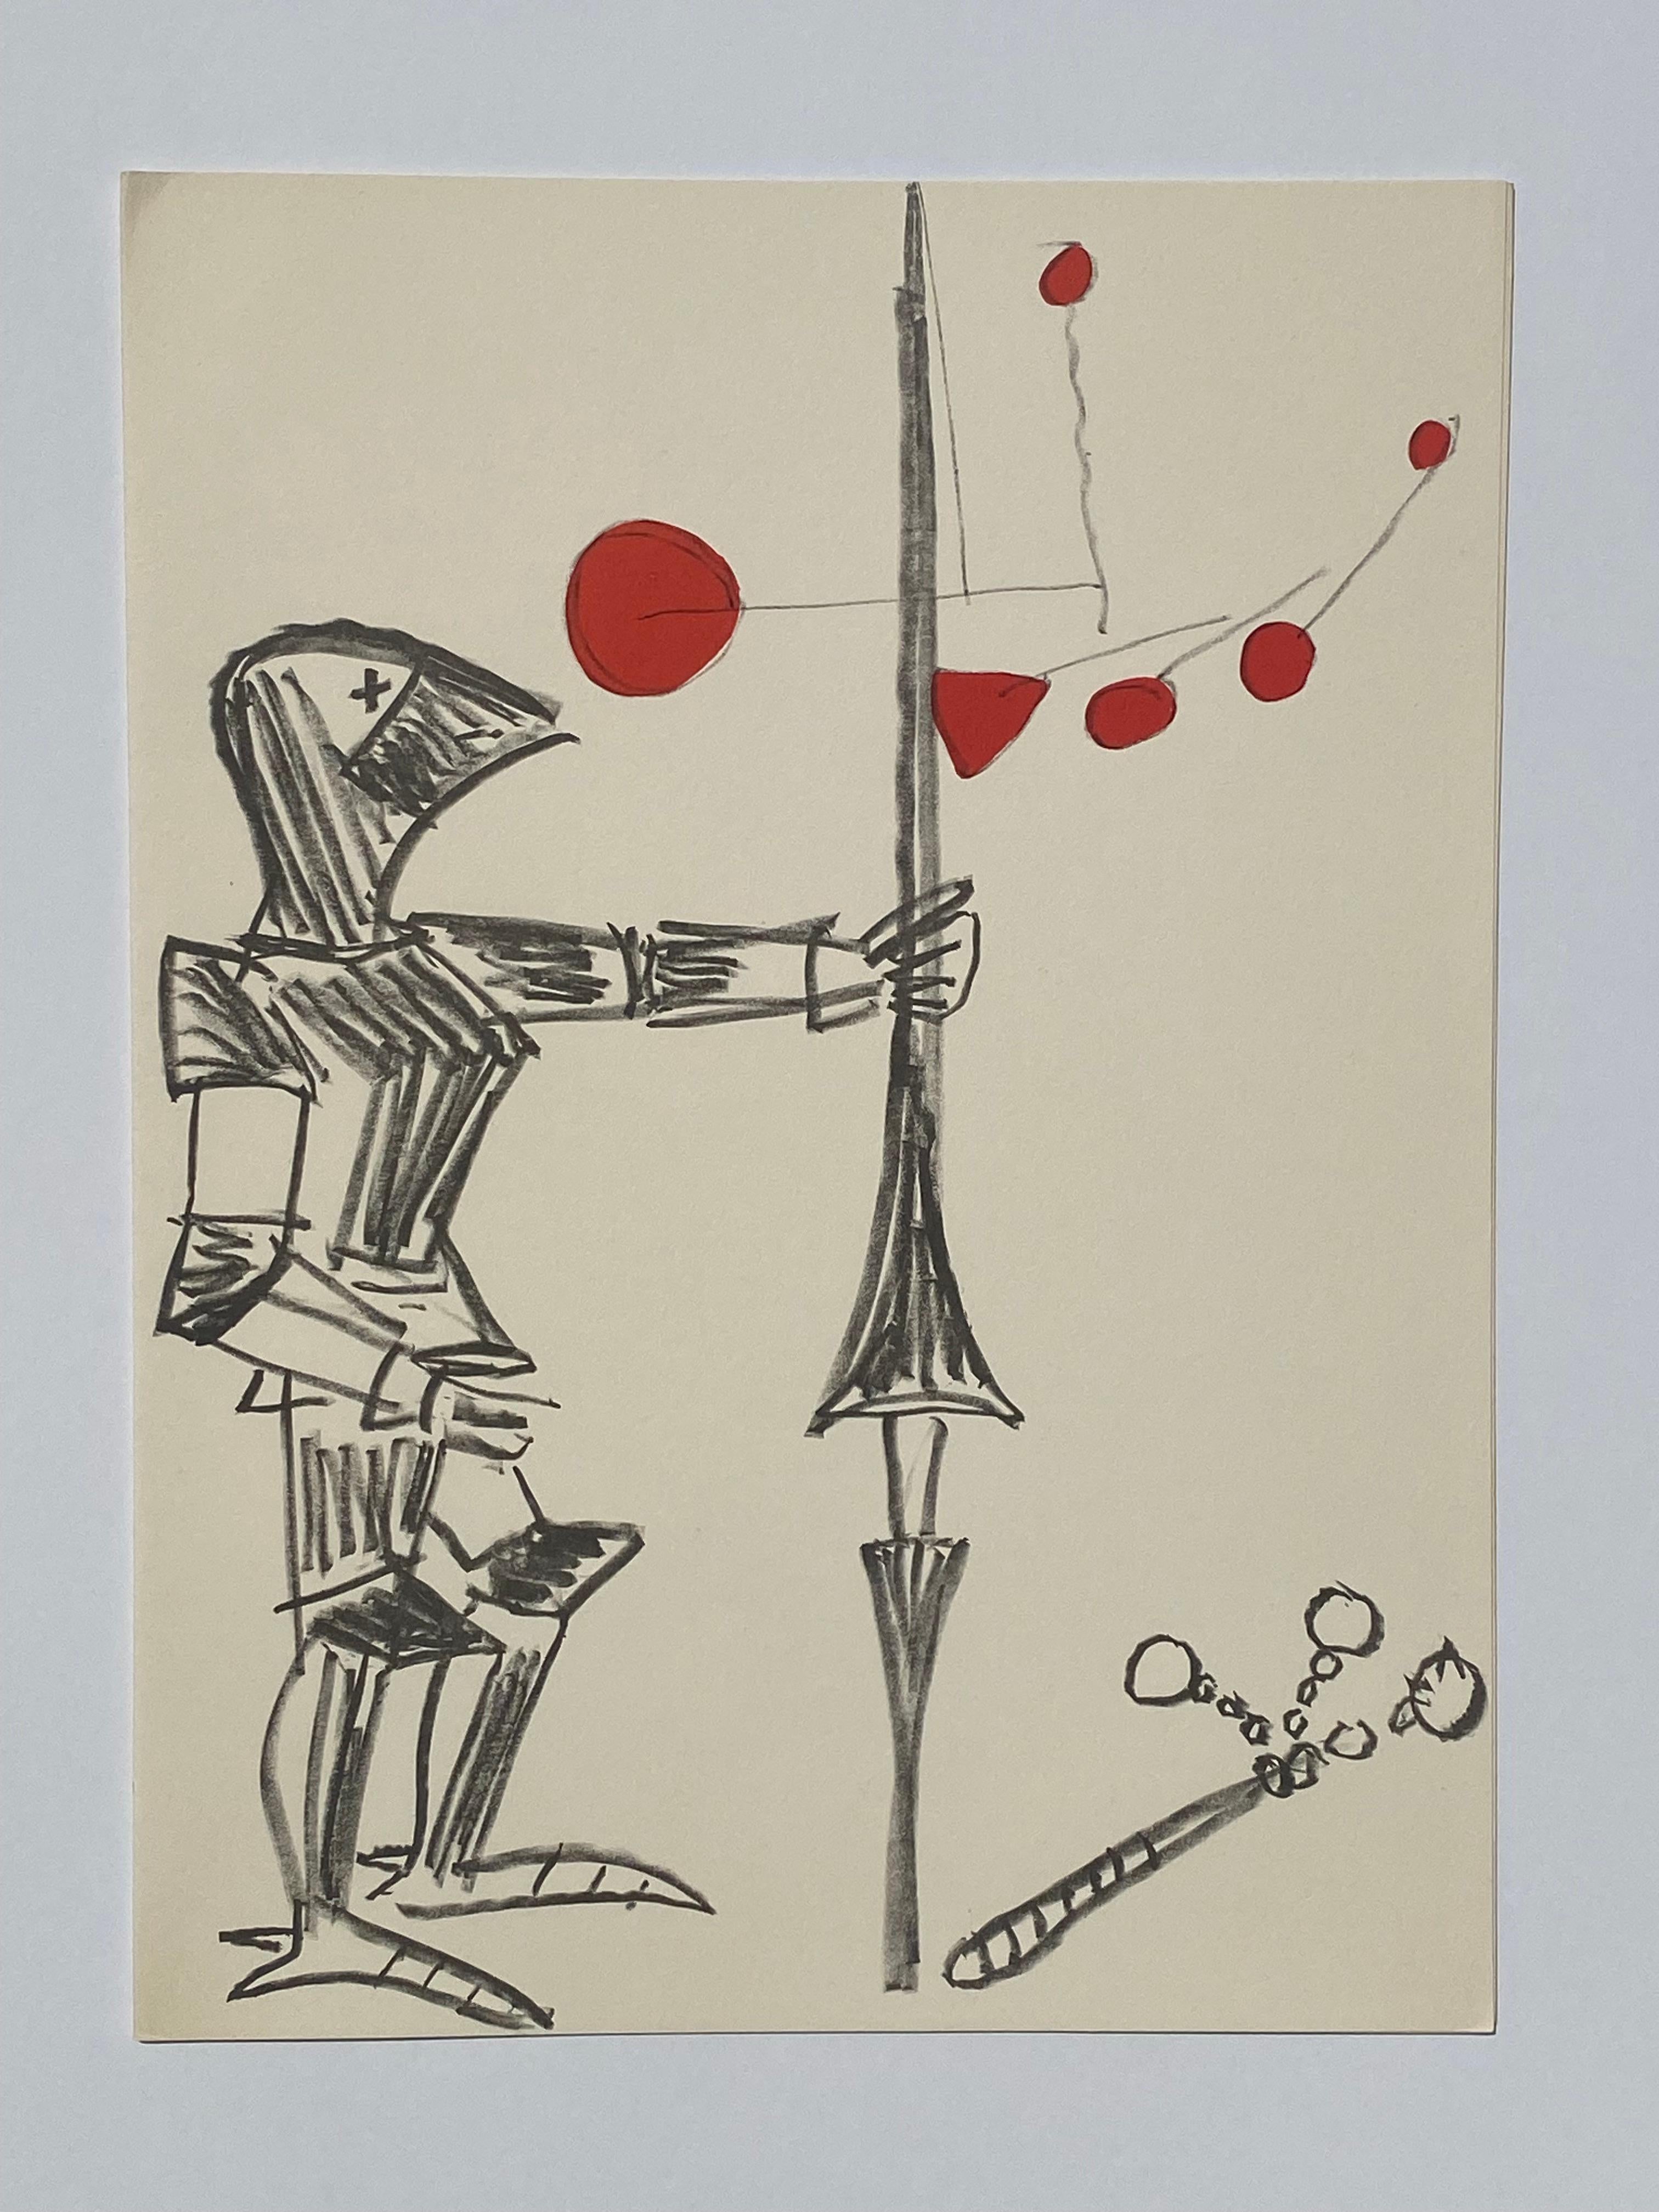 Alexander Calder (American, 1898-1976)
“Le Noble Chevalier, 1960”
Lithograph in Colors on Velin de Rives paper
Sheet Size: 11” x 16” (27.94 x 40.64 cm)
Printed by Maeght Editeur, Paris
Edition Size: This print was one of 150 unsigned copies included